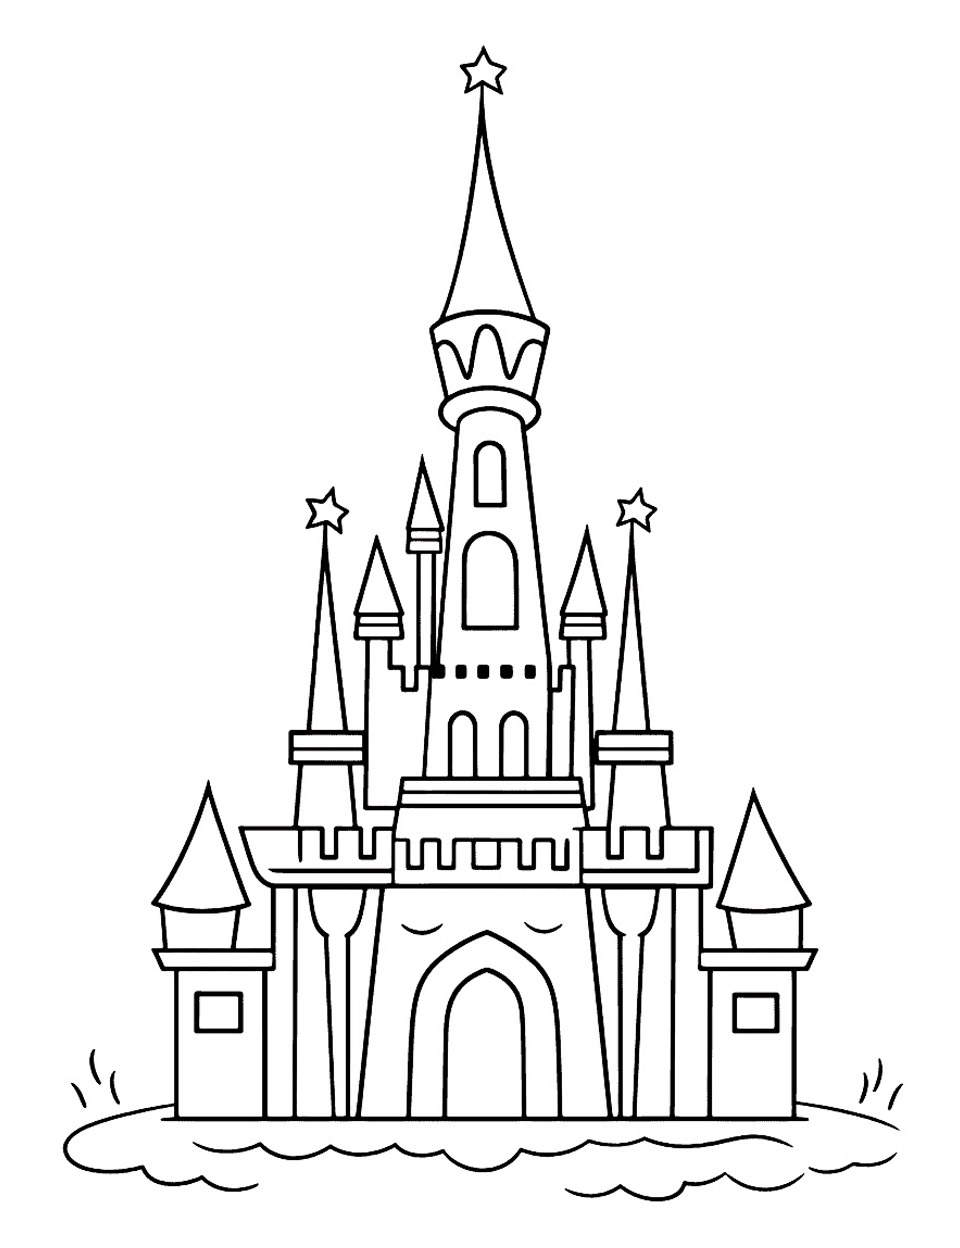 Simple drawing of a fairytale castle. This castle is a simplified and inspired version of Sleeping Beauty's castle.